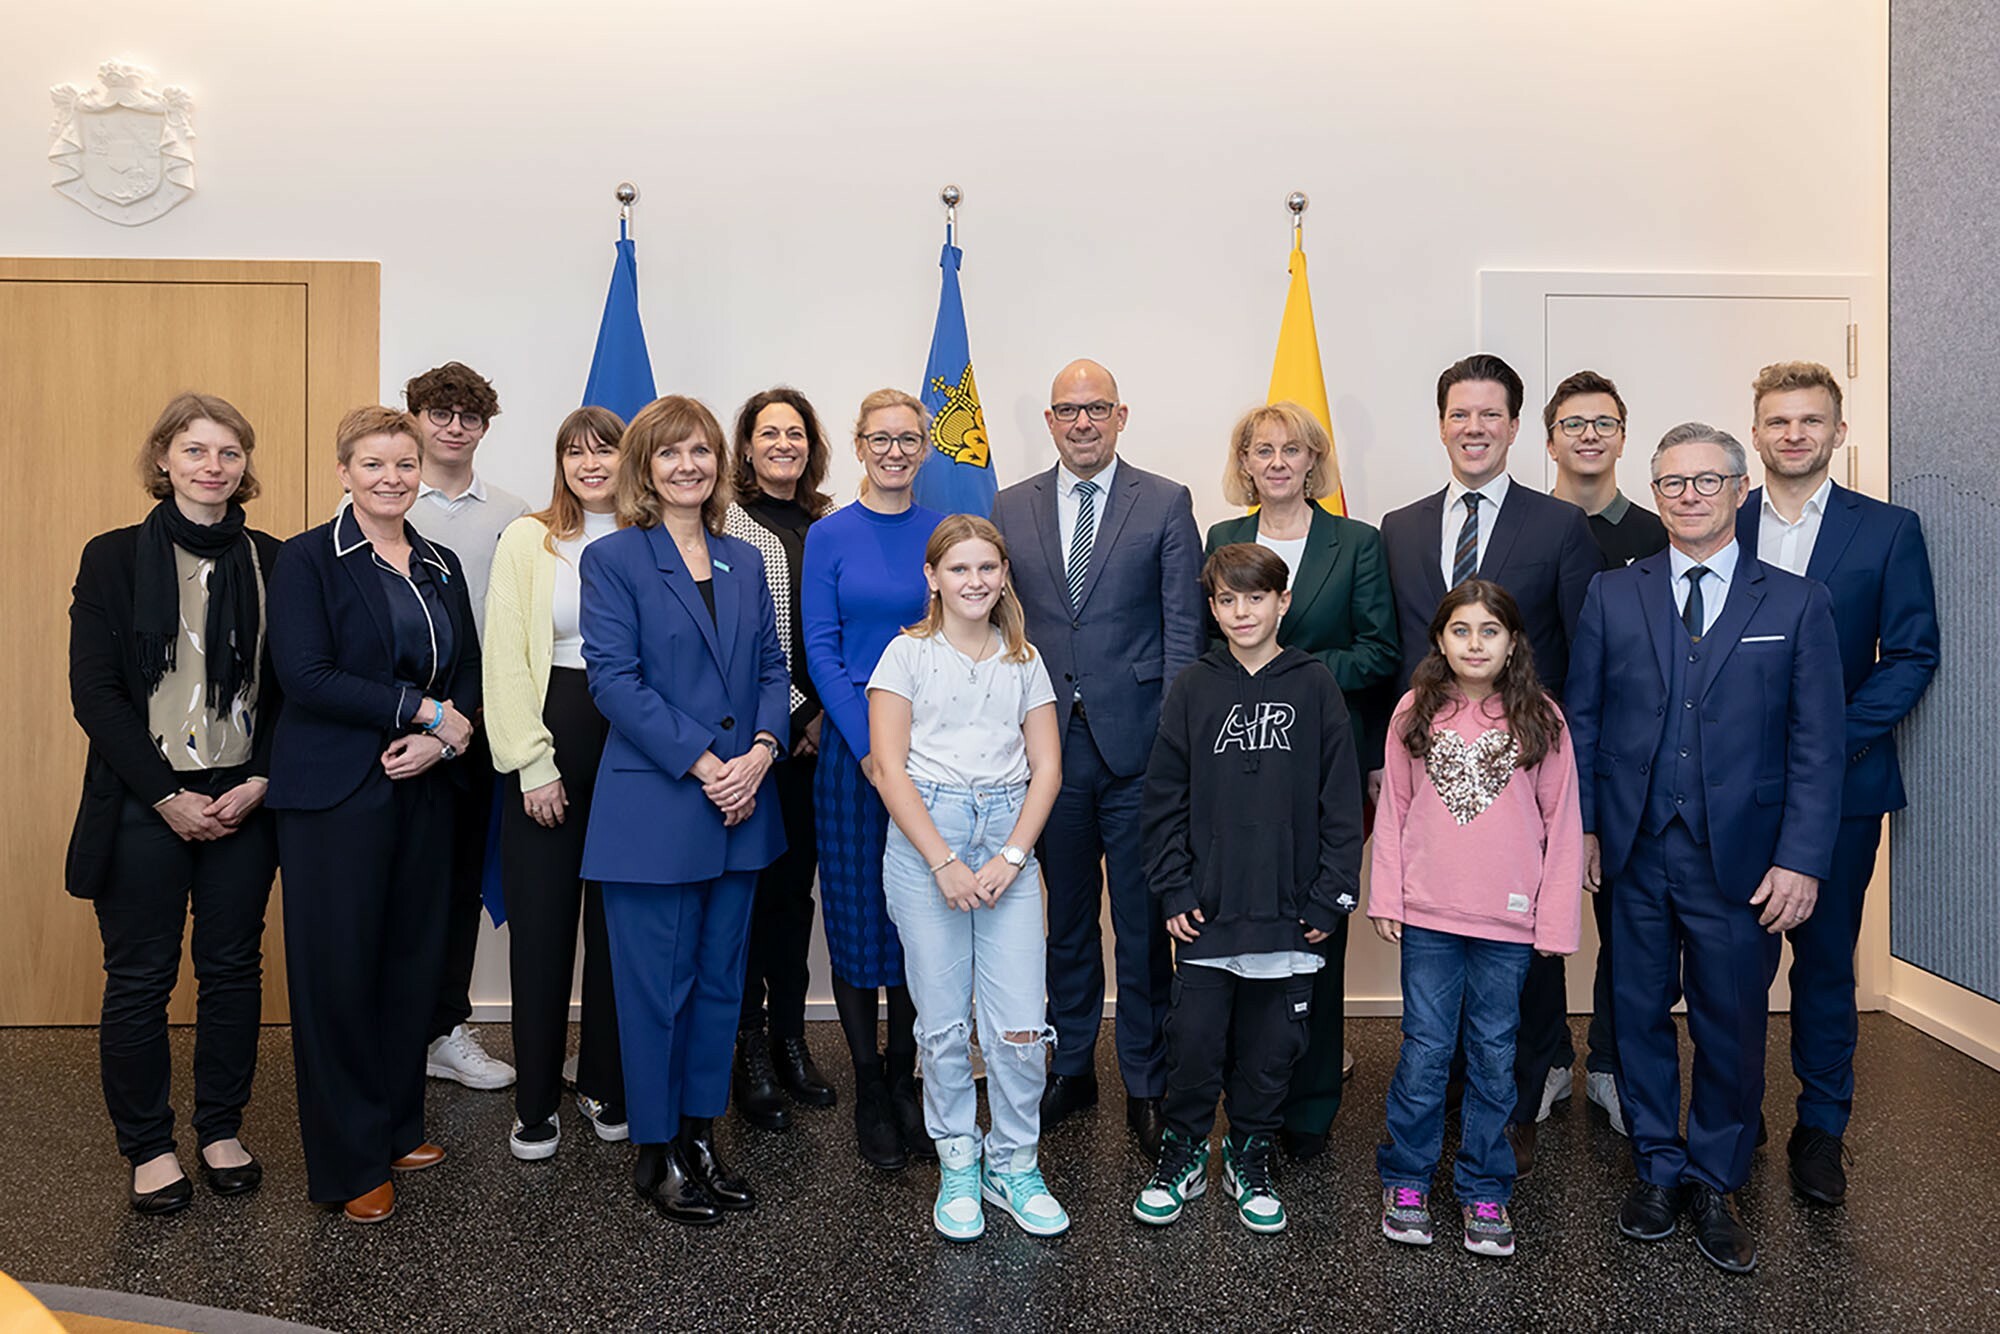 The members of the government with the young Liechtensteiners and the representatives of UNICEF Switzerland and Liechtenstein.